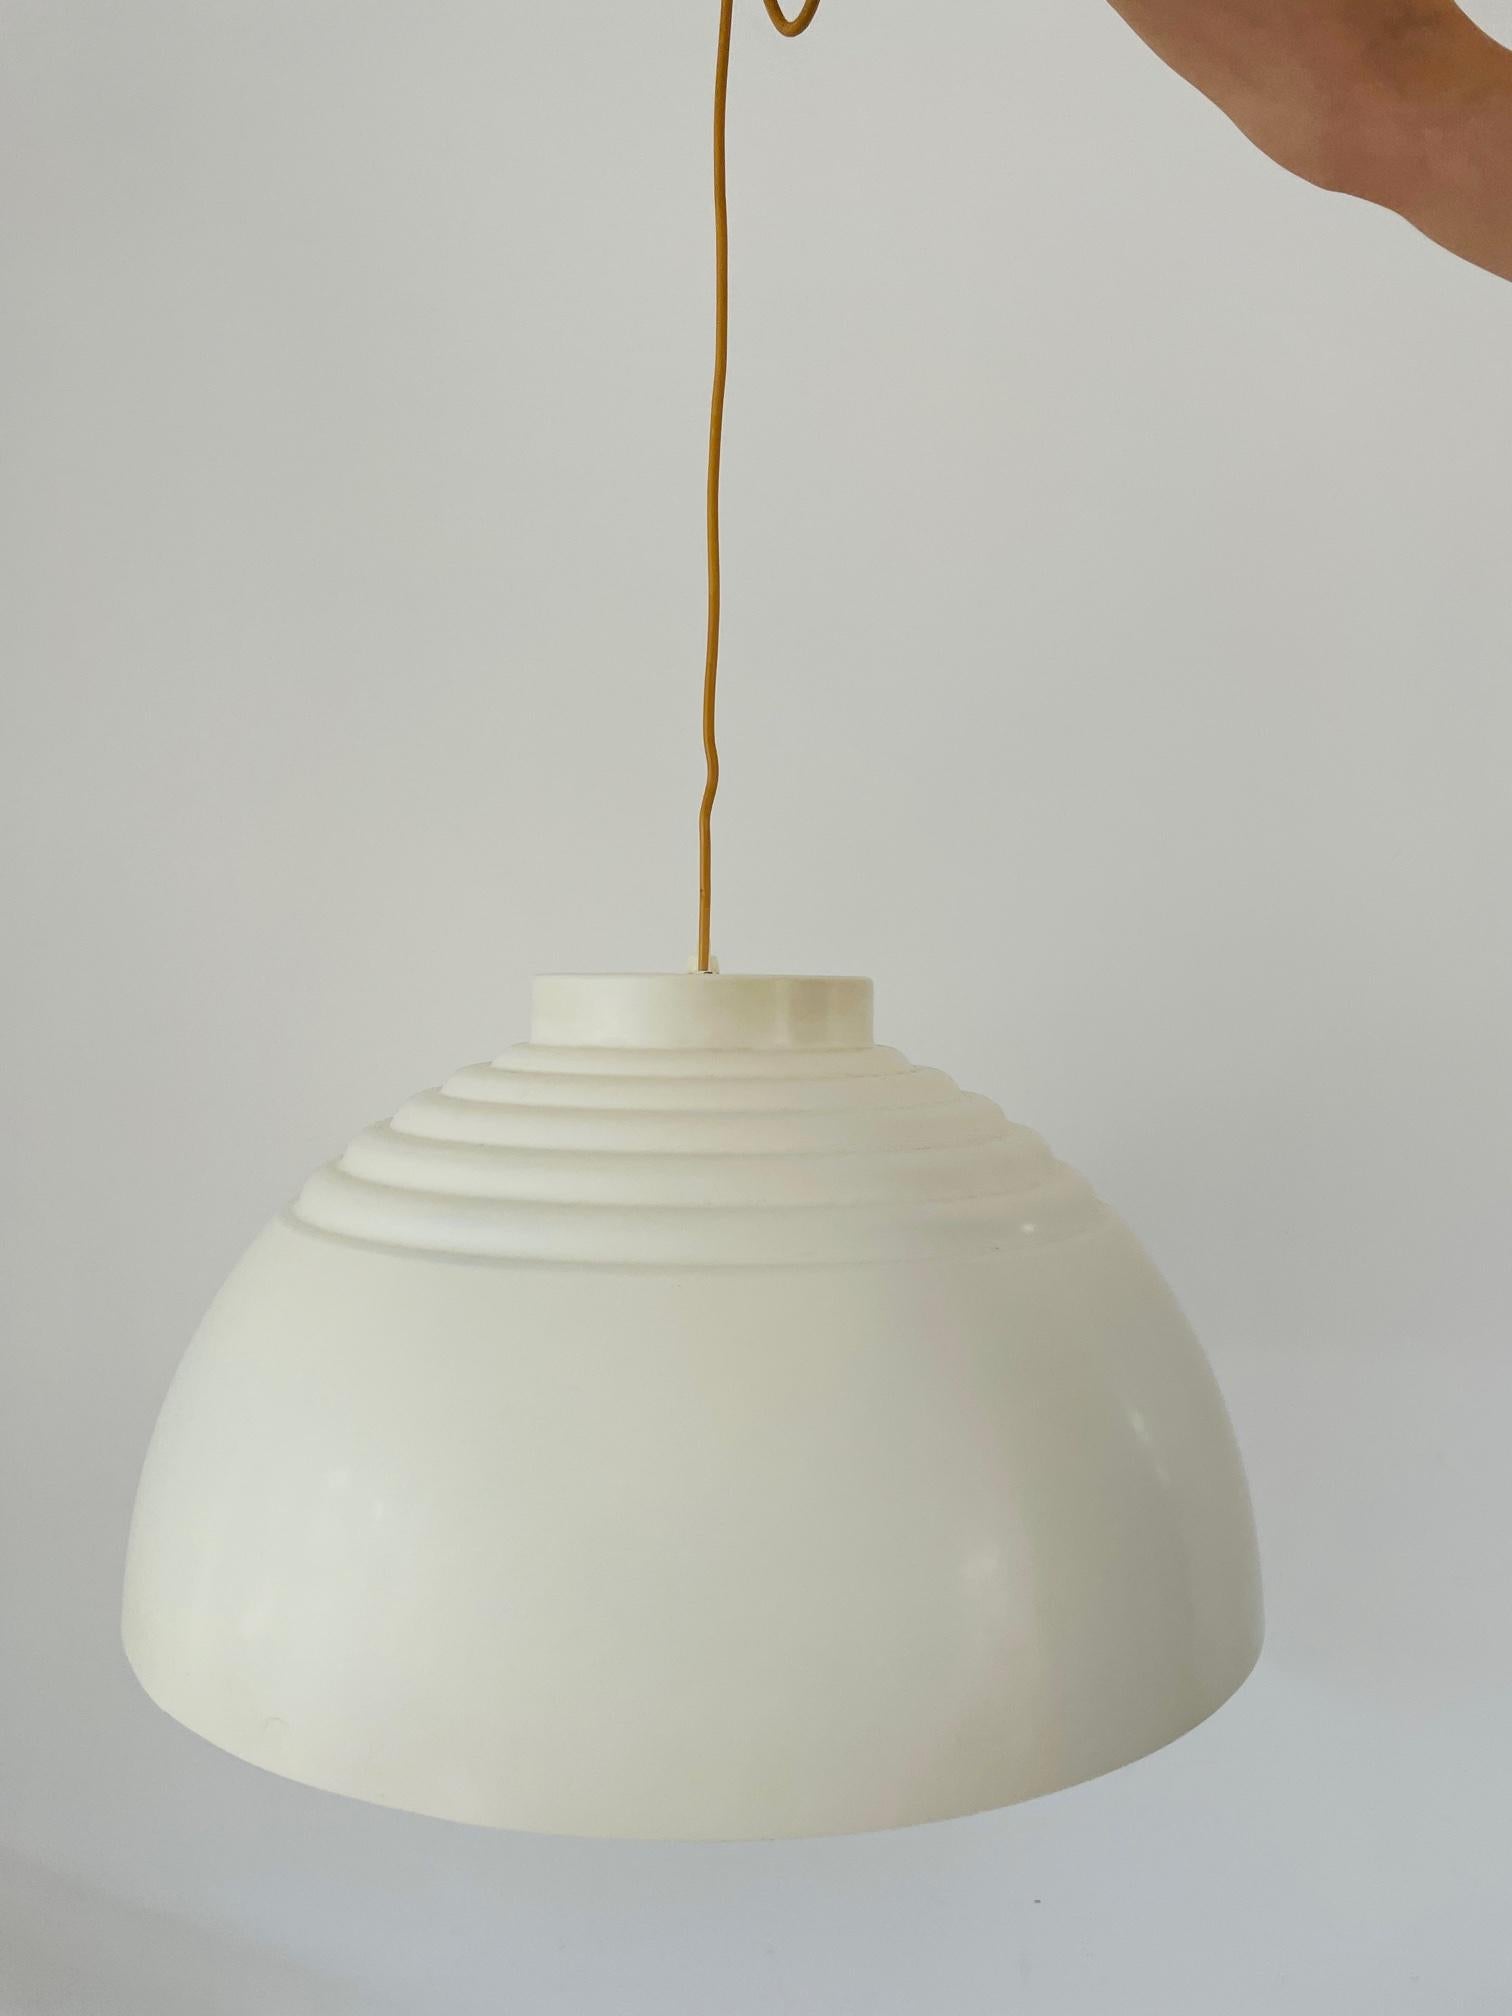 This is one of the most beautiful and rare lamps I've ever seen. Made by worldfamous Hans-Agne Jakobsson. This Swedish designer made a lot of furniture and lighting. This is one of the rarest of all. Where ever you look on the internet, you will